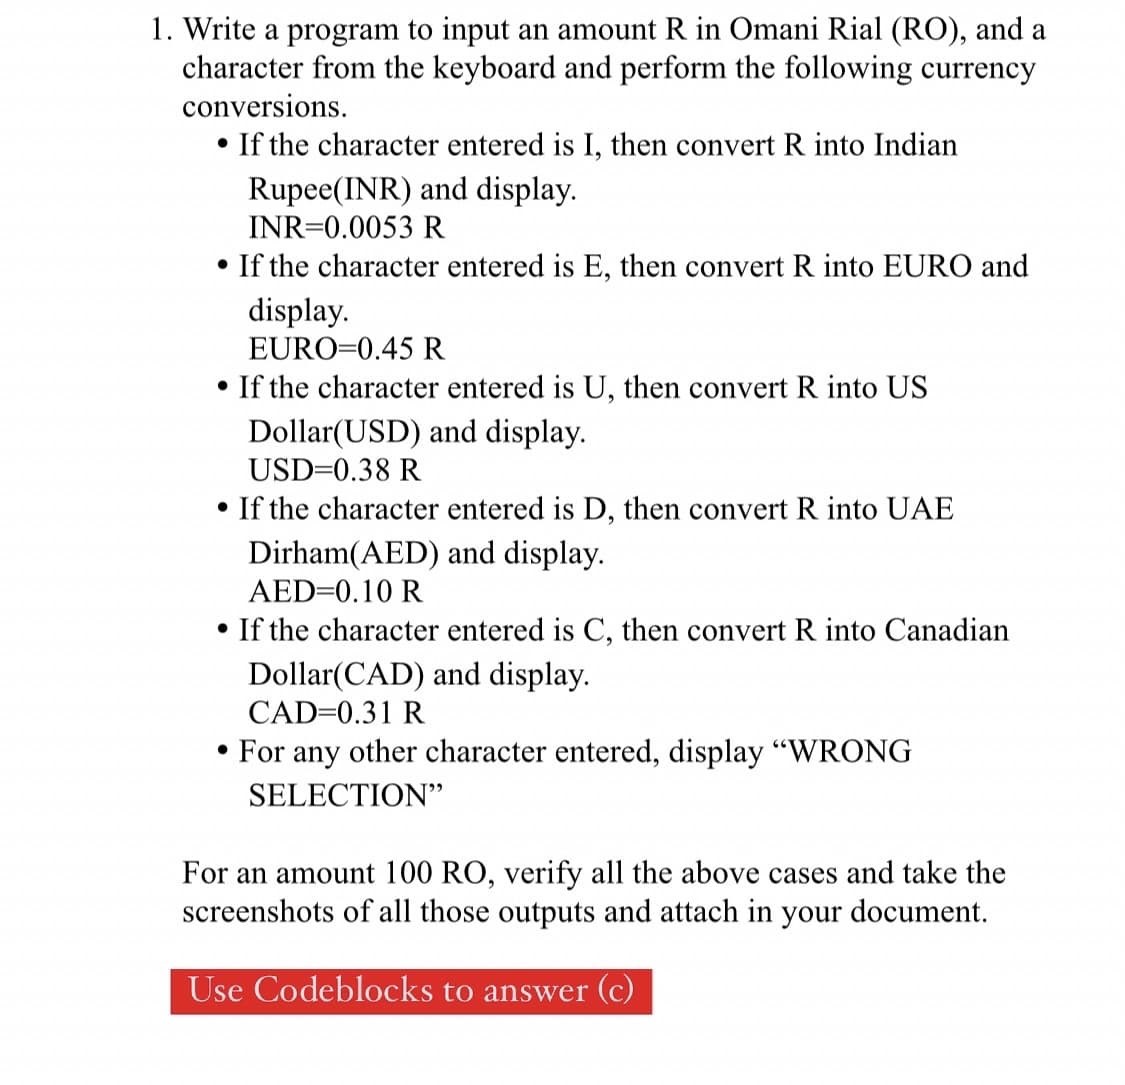 1. Write a program to input an amount R in Omani Rial (RO), and a
character from the keyboard and perform the following currency
conversions.
• If the character entered is I, then convert R into Indian
Rupee(INR) and display.
INR=0.0053 R
If the character entered is E, then convert R into EURO and
display.
EURO=0.45 R
• If the character entered is U, then convert R into US
Dollar(USD) and display.
USD=0.38 R
• If the character entered is D, then convert R into UAE
Dirham(AED) and display.
AED=0.10 R
• If the character entered is C, then convert R into Canadian
Dollar(CAD) and display.
CAD=0.31 R
• For any other character entered, display "WRONG
SELECTION"
For an
unt 100 RO, verify all the above cases and take the
screenshots of all those outputs and attach in your document.
Use Codeblocks to answer (c)
